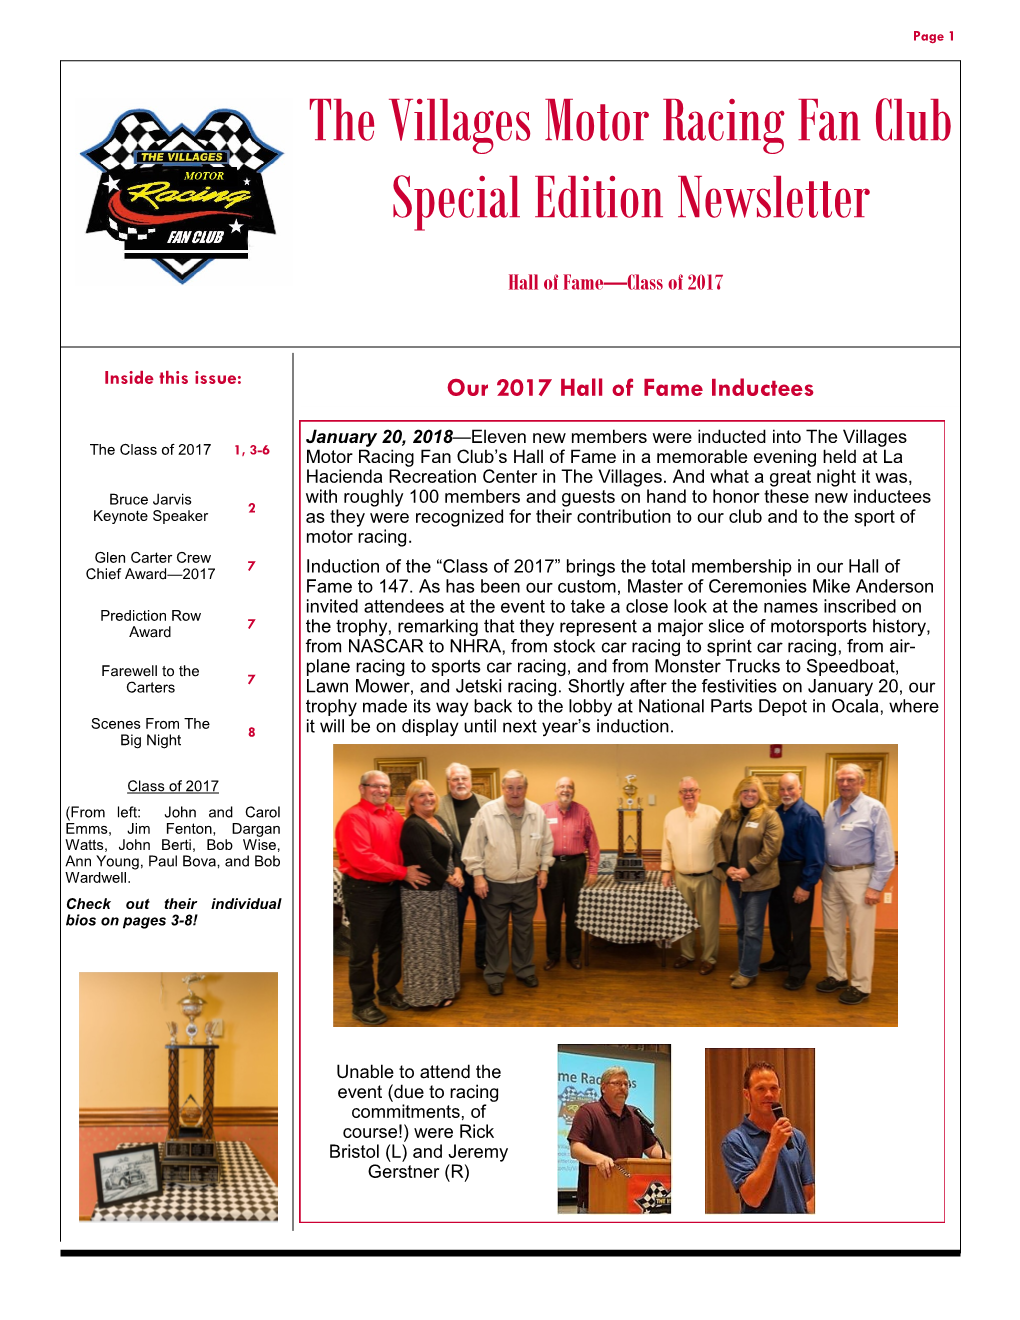 The Villages Motor Racing Fan Club Special Edition Newsletter